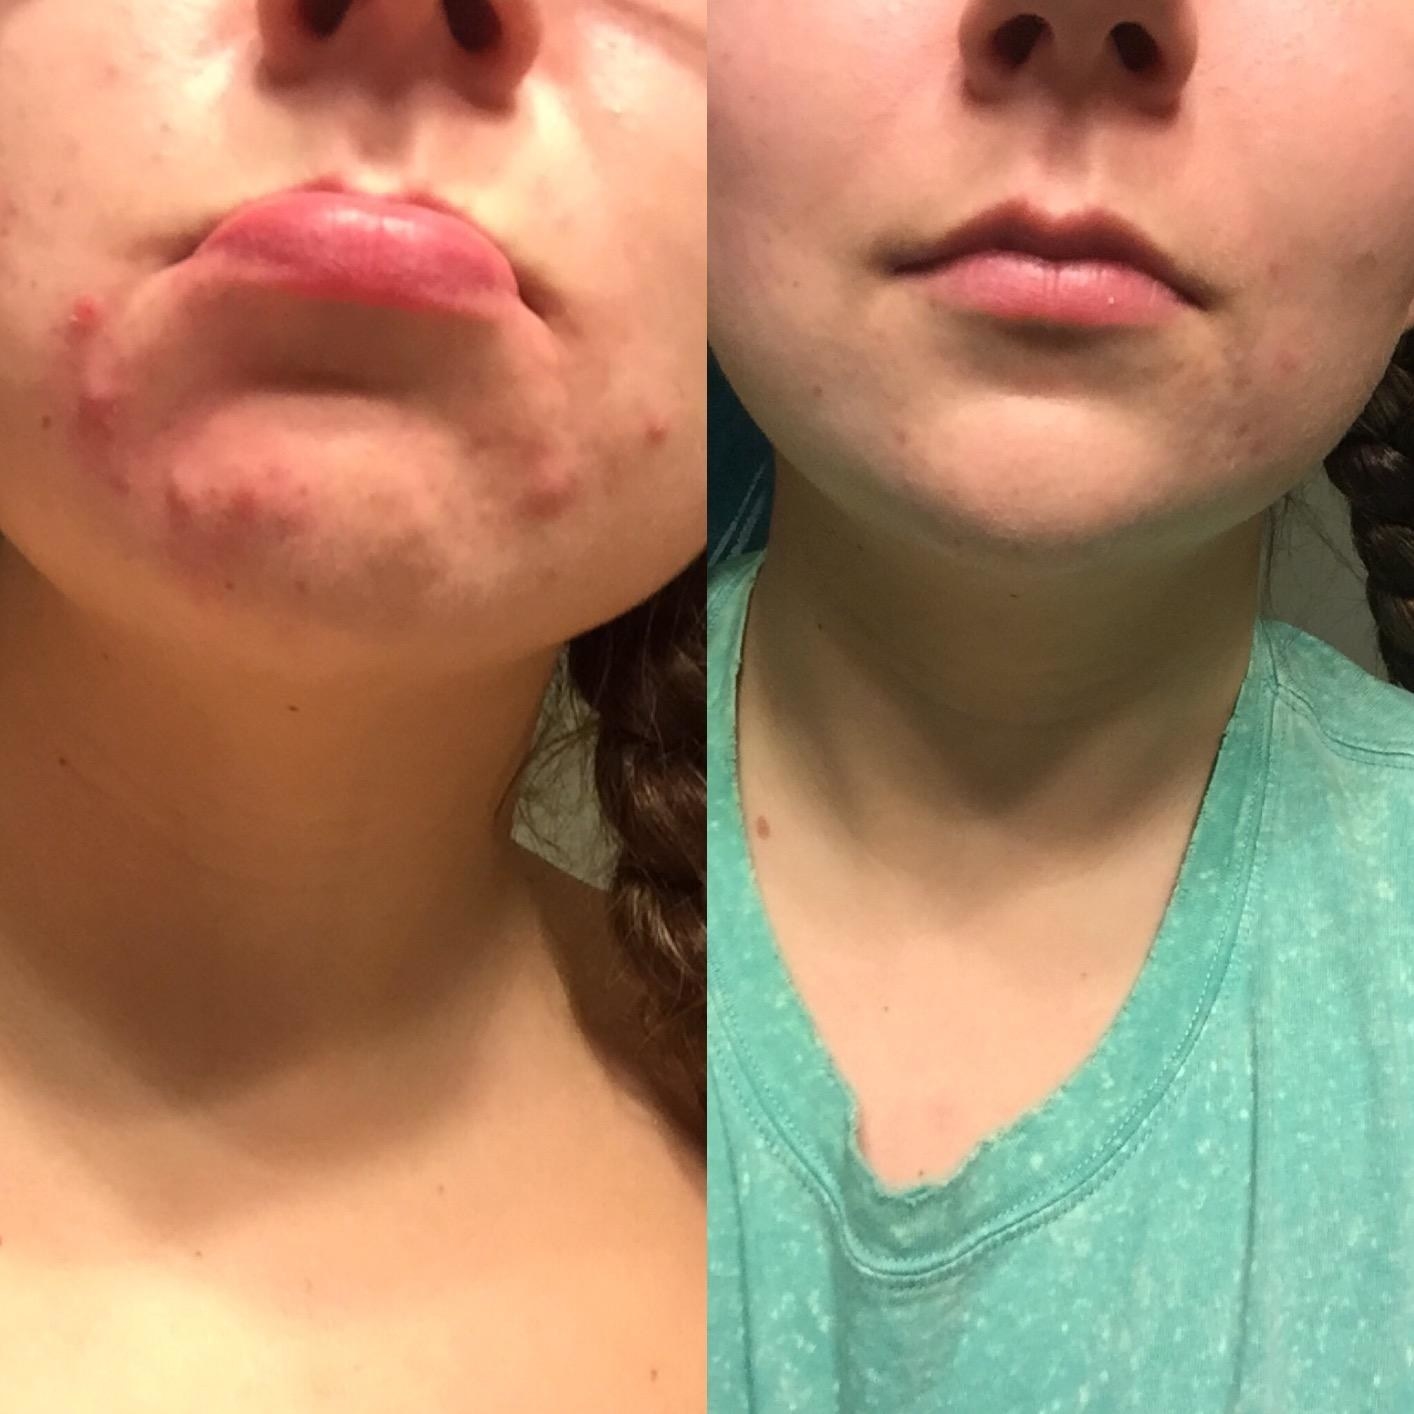 on the left a reviewer&#x27;s chin with breakouts, on the right the same chin looking nearly clear